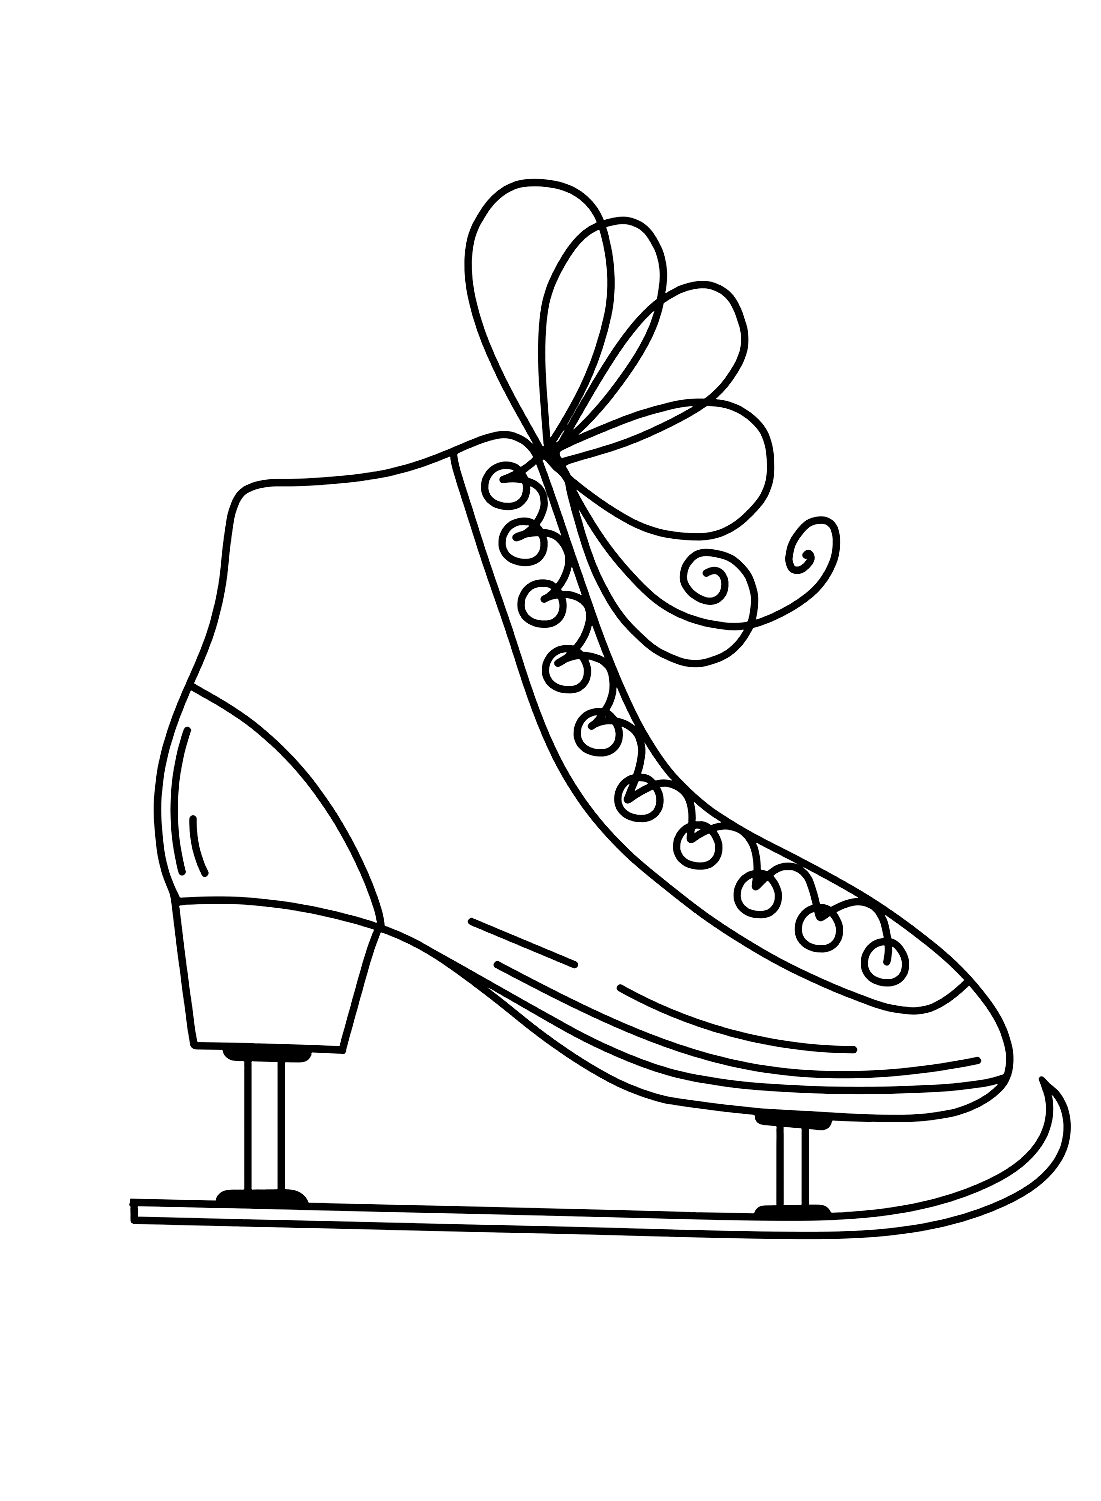 Coloring Sheet of Ice Skates from Shoe